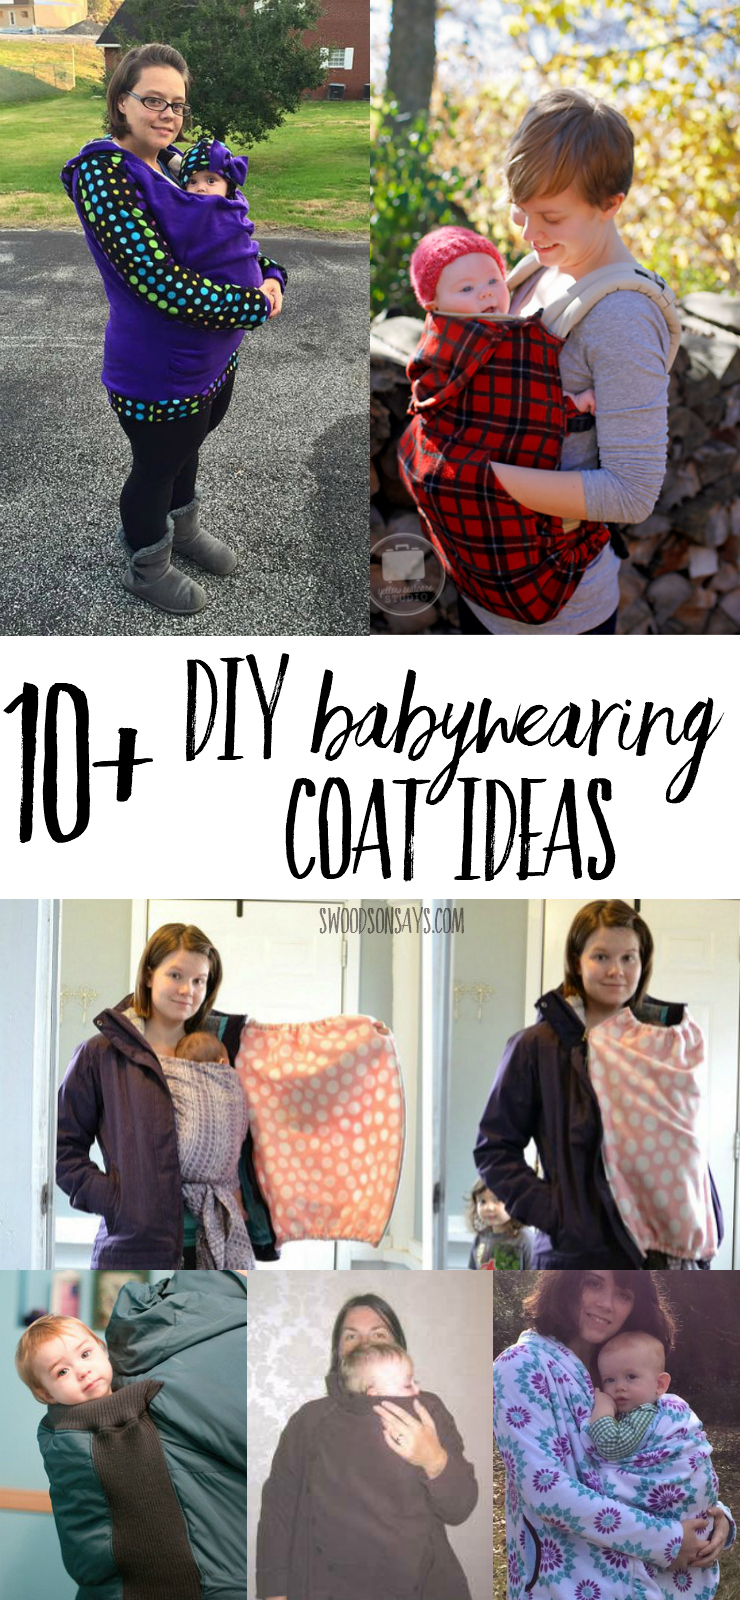 Babywearing coats are expensive! Check out these diy babywearing coat tutorials and patterns so you can make your own coat for back or front carrying your child in a carrier. #babywearing #diybabywearingcoat 